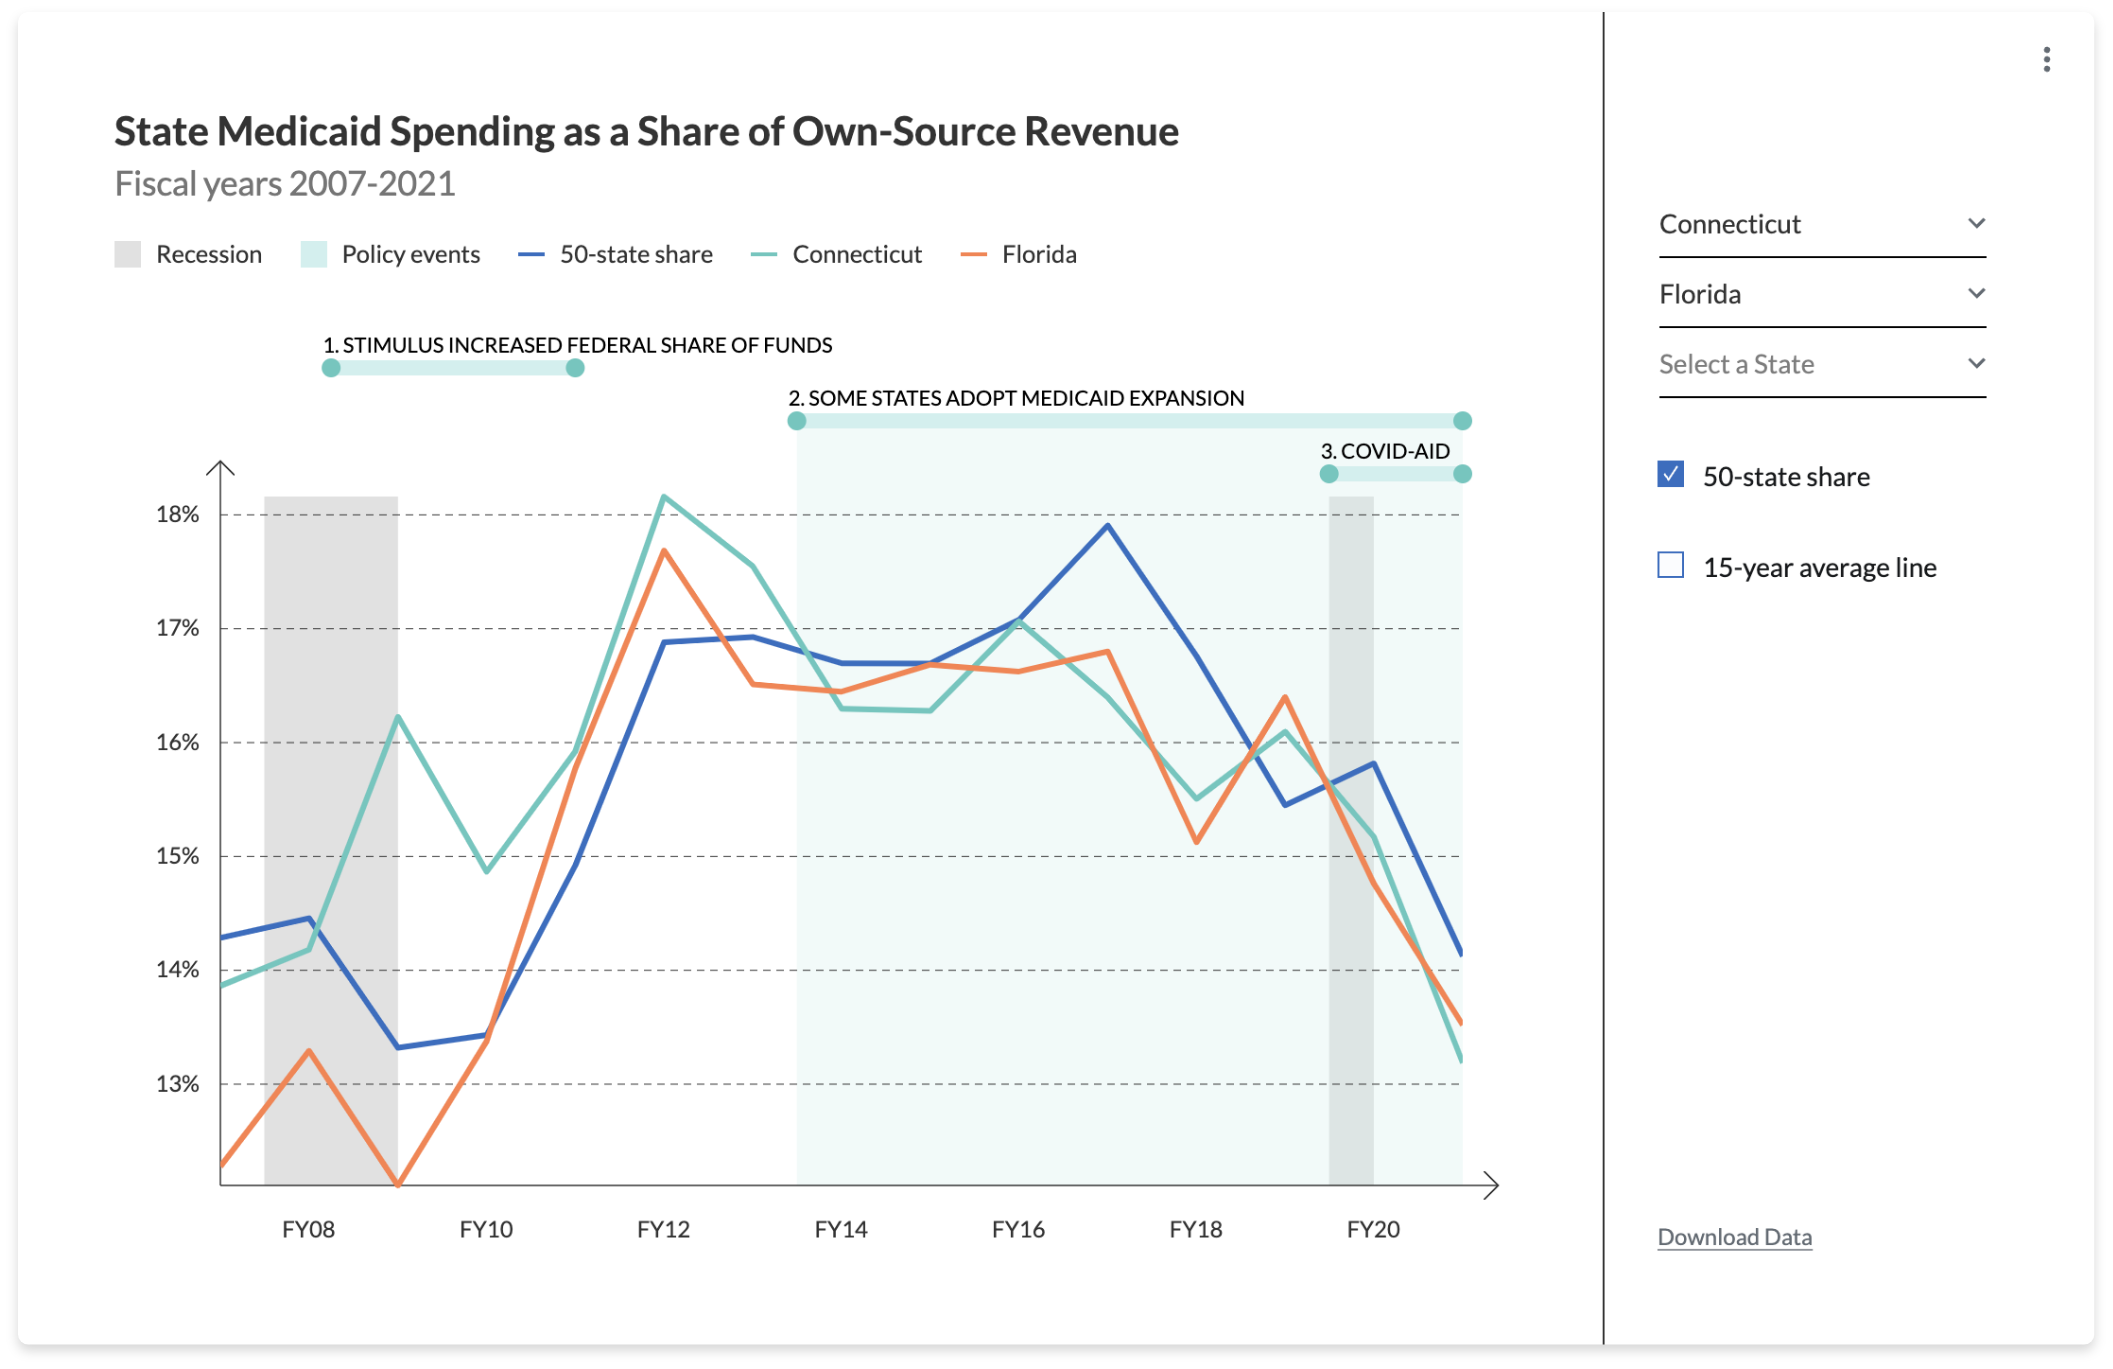 Line chart titled 'State Medicaid Spending as a Share of Own-Source Revenue, Fiscal years 2007-2021' comparing Connecticut and Florida. The chart includes lines for the 50-state share (blue), Connecticut (teal), and Florida (orange), with percentage values on the y-axis ranging from 12% to 18% and fiscal years on the x-axis from FY08 to FY20. Shaded gray areas represent recessions, and teal shaded areas represent policy events such as 'Stimulus Increased Federal Share of Funds,' 'Some States Adopt Medicaid Expansion,' and 'COVID-AID.' Interactive elements include checkboxes for toggling the 50-state share line and the 15-year average line, and a dropdown menu for selecting states. Clicking on the policy event bars expands to show detailed timeline coverage. Annotations highlight significant policy events, and the legend explains the color coding for the different lines and events.